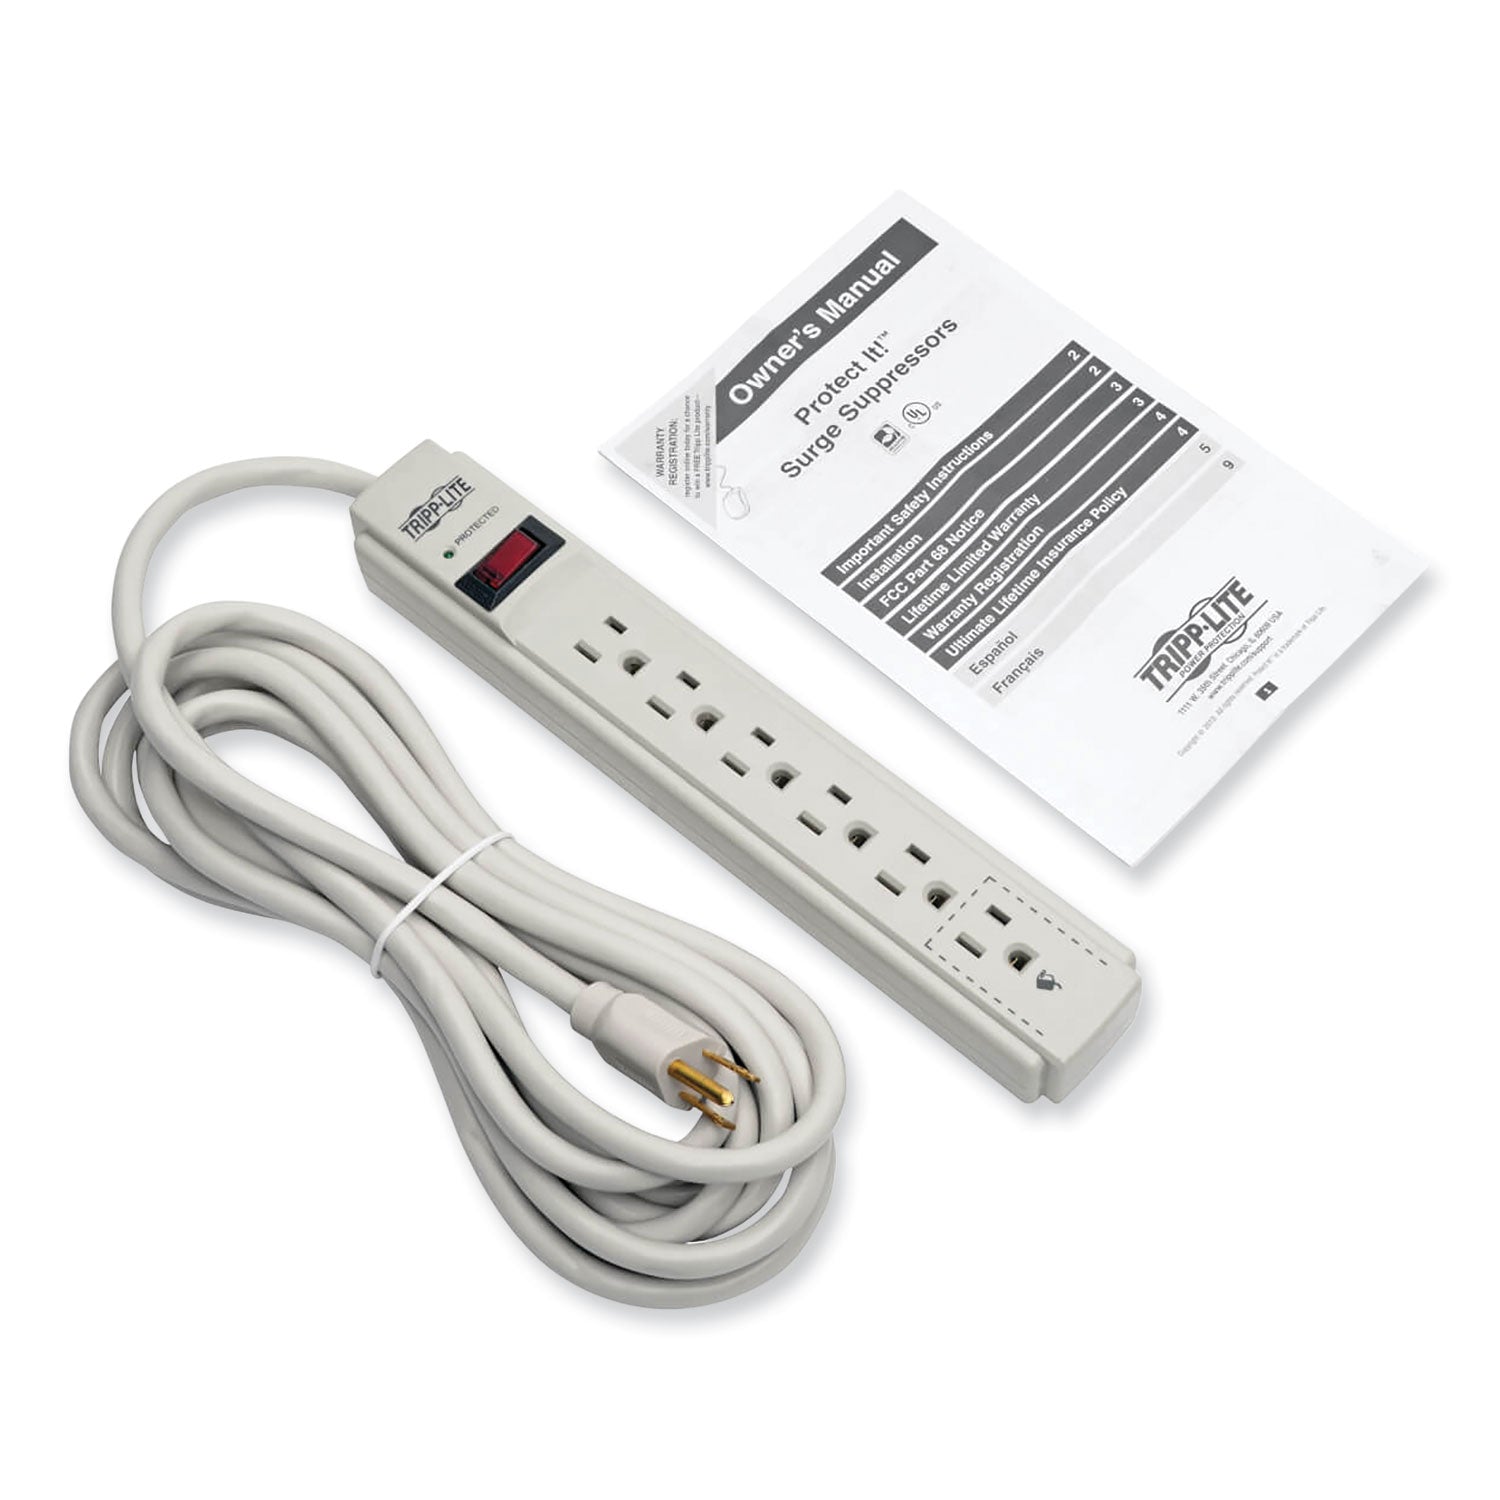 Protect It! Surge Protector, 6 AC Outlets, 15 ft Cord, 790 J, Light Gray - 